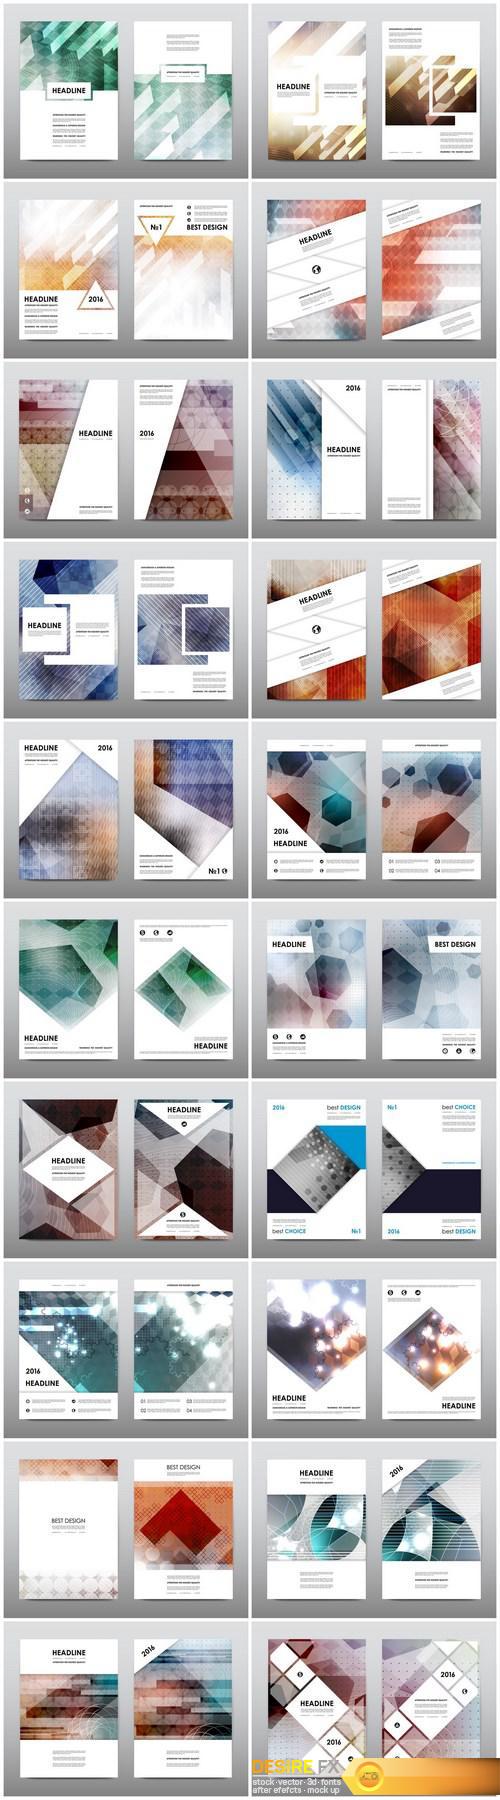 Magazine booklet cover, brochure layout template & abstract flyer design - 20xEPS Vector Stock